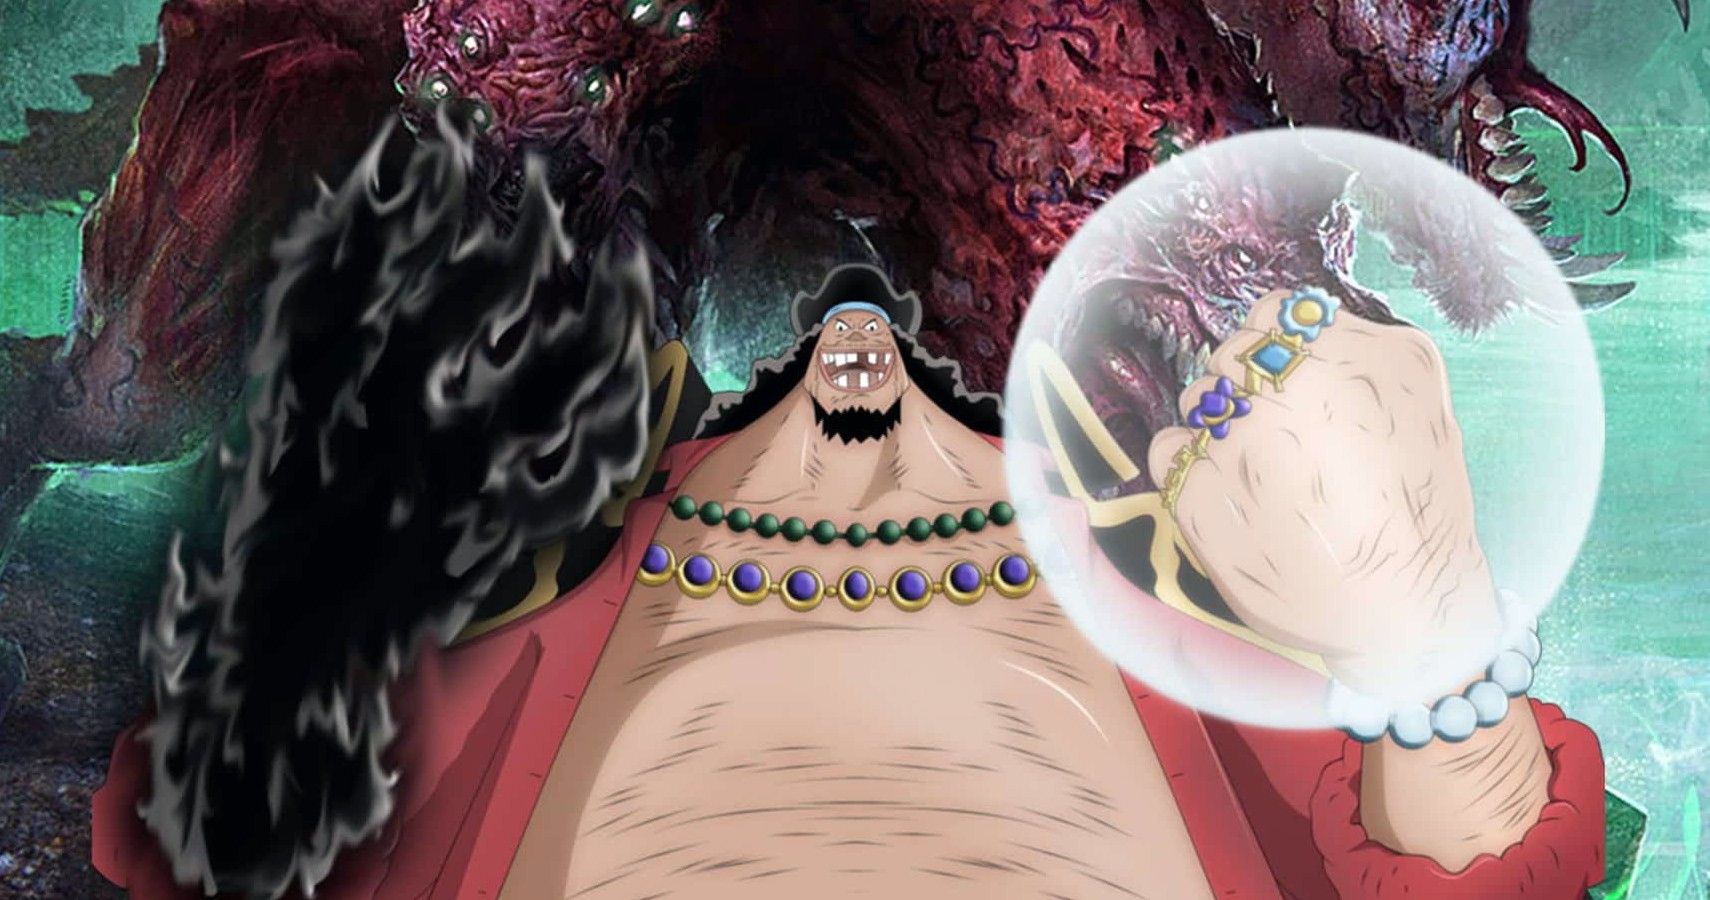 Who has the strongest Logia?